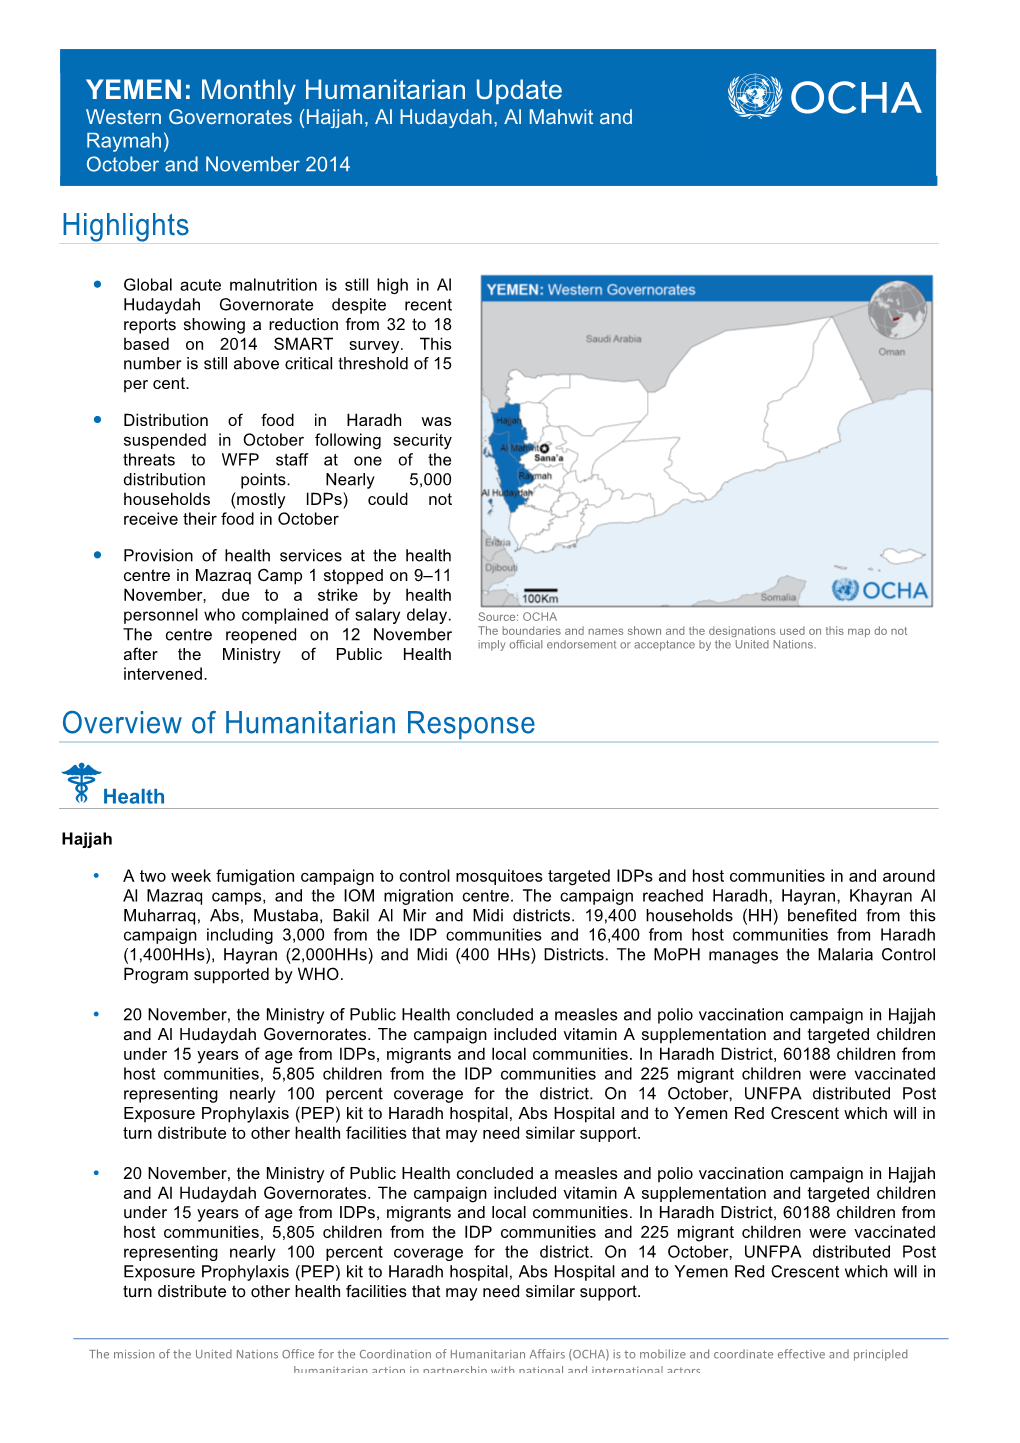 Highlights Overview of Humanitarian Response